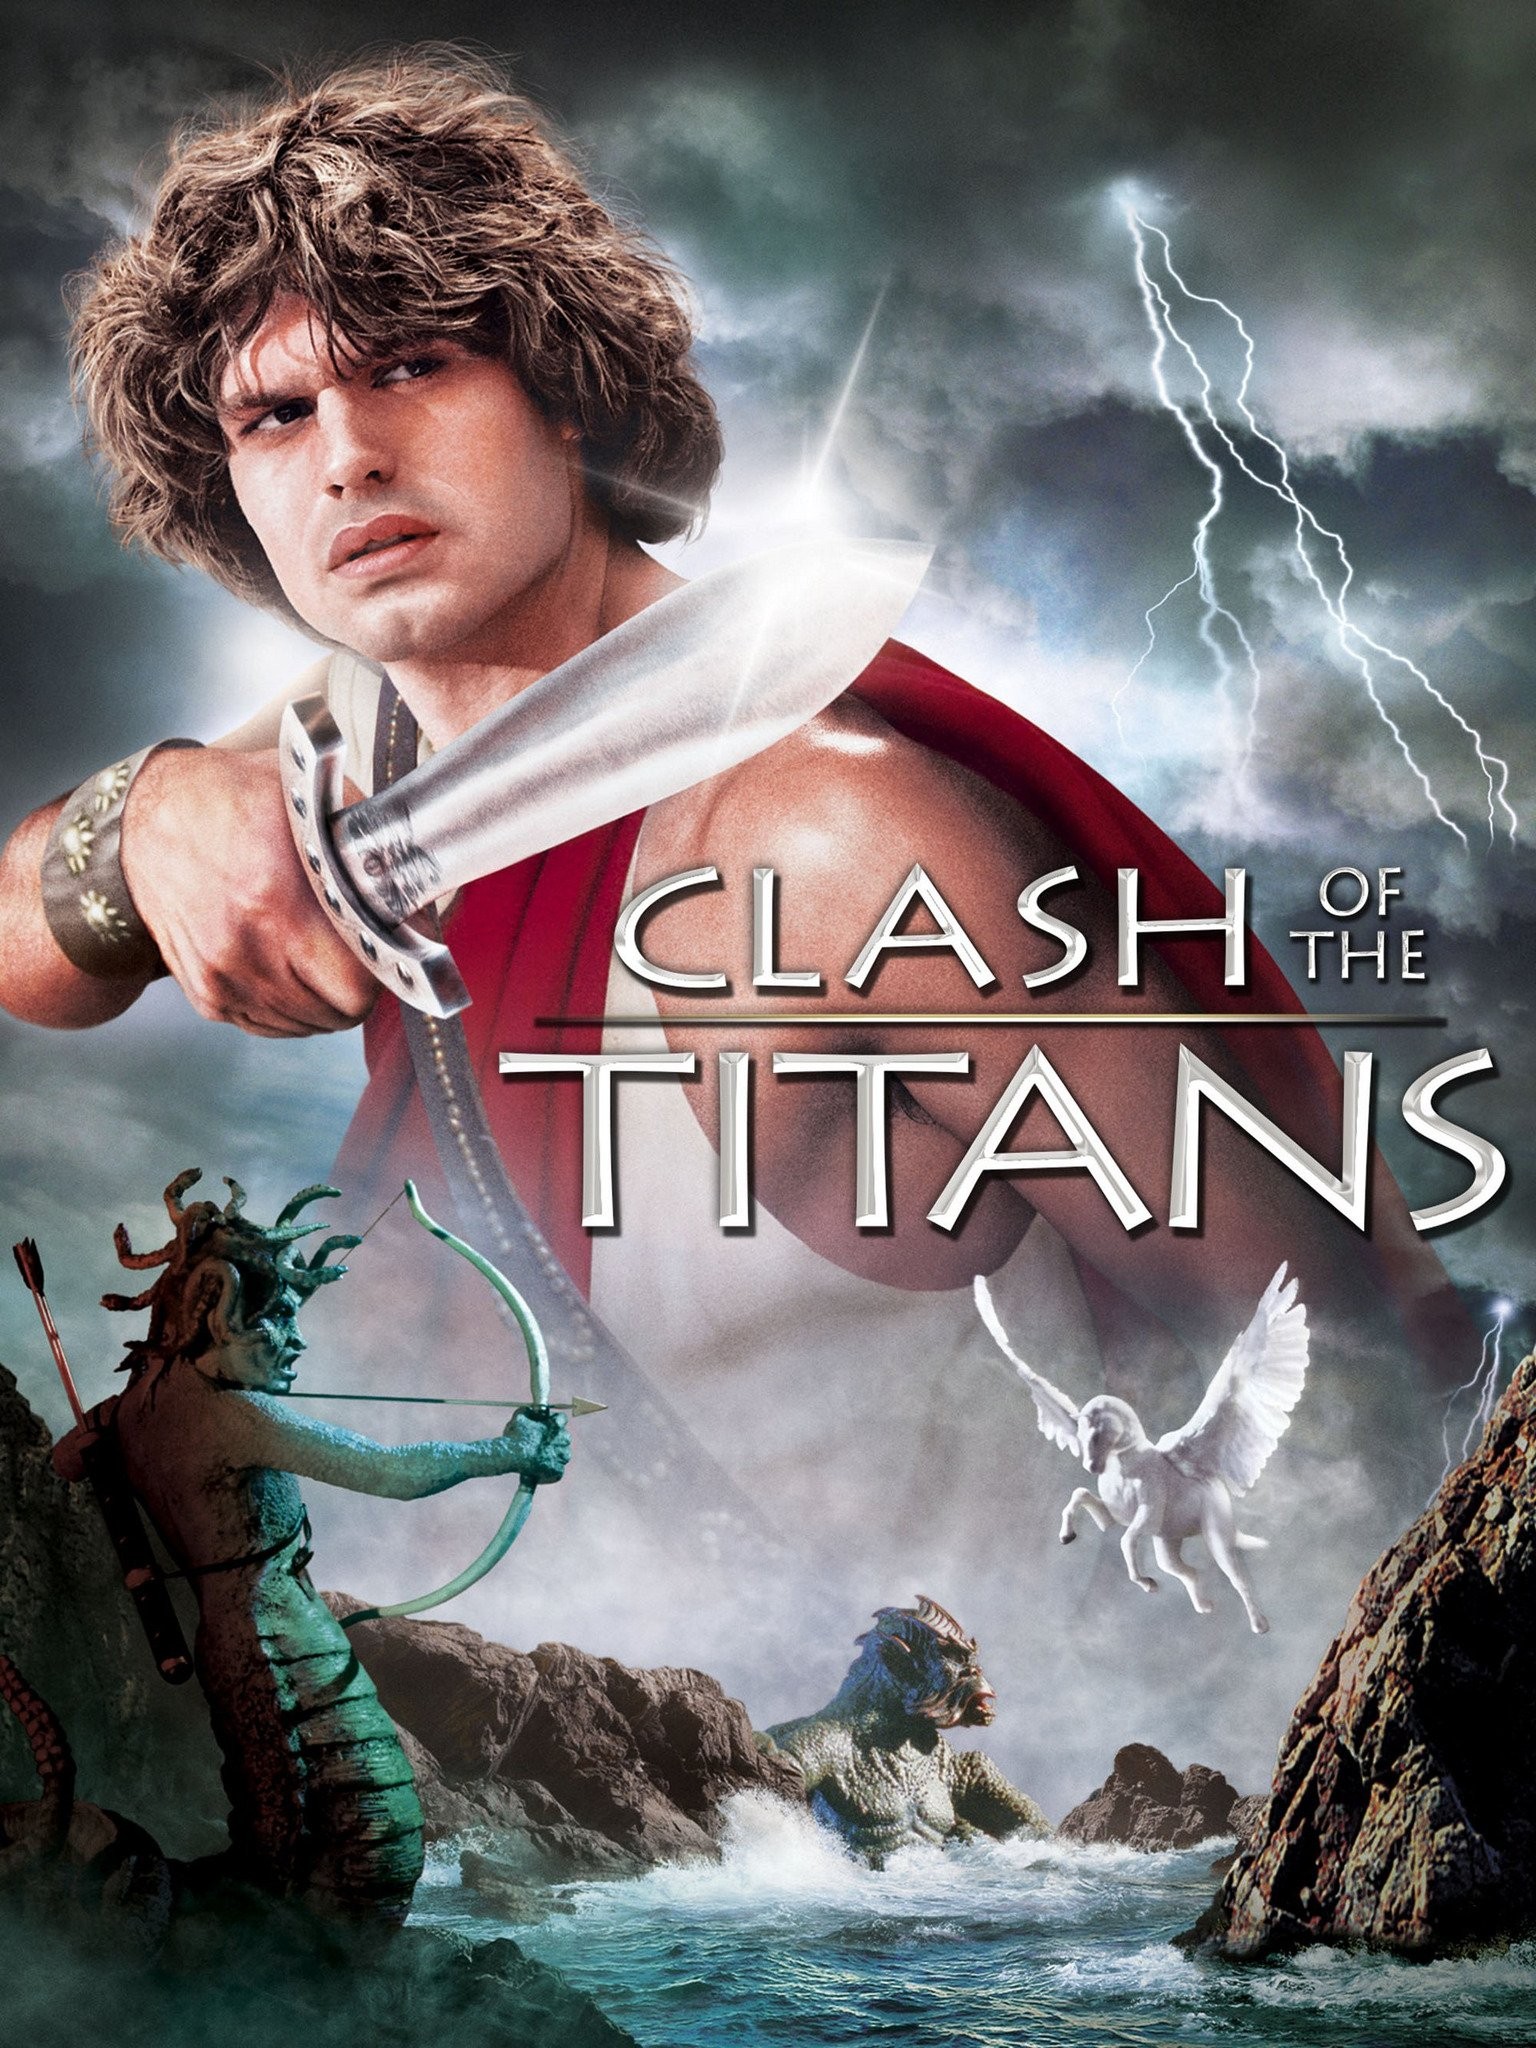 33 Facts about the movie Clash of the Titans 